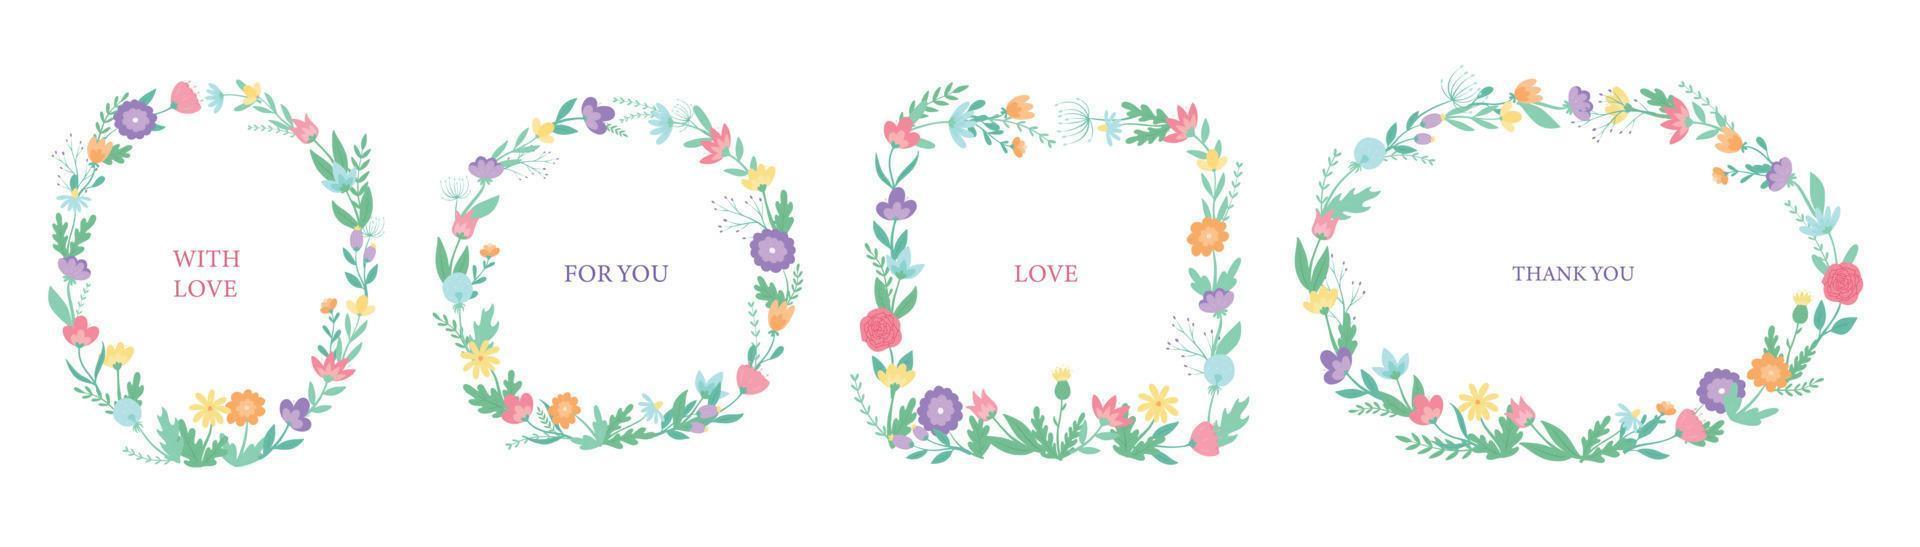 Set of four floral wreaths decorated with vintage flowers. Good for posters, prints, cards, invitations, templates, banners, stickers. Mother's day spring, womens day, easter theme. EPS 10 vector